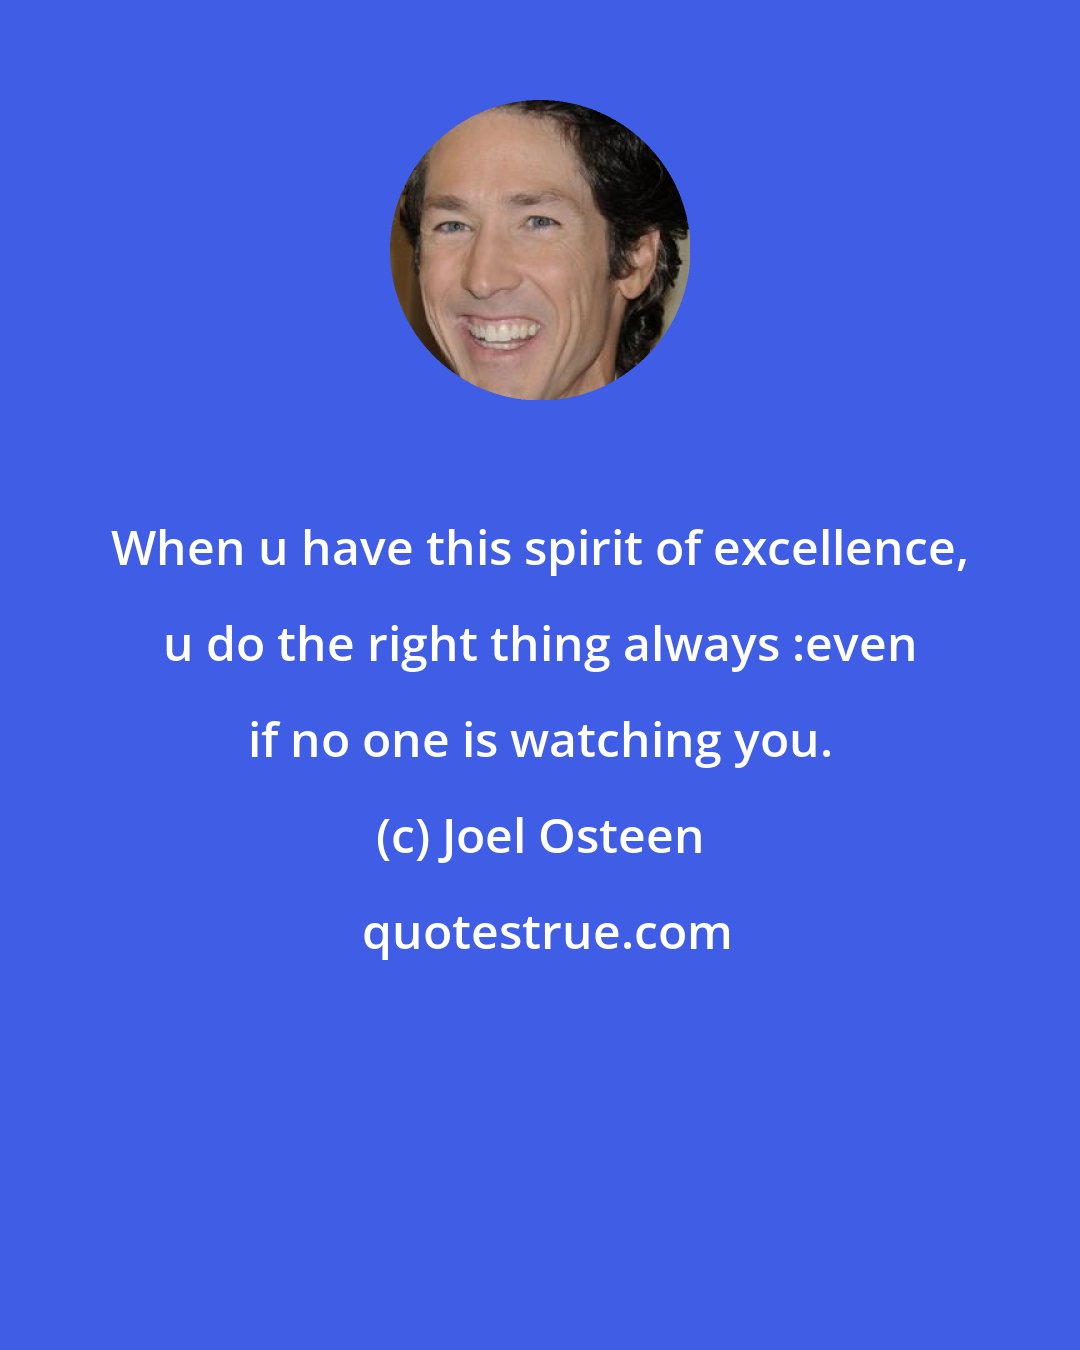 Joel Osteen: When u have this spirit of excellence, u do the right thing always :even if no one is watching you.